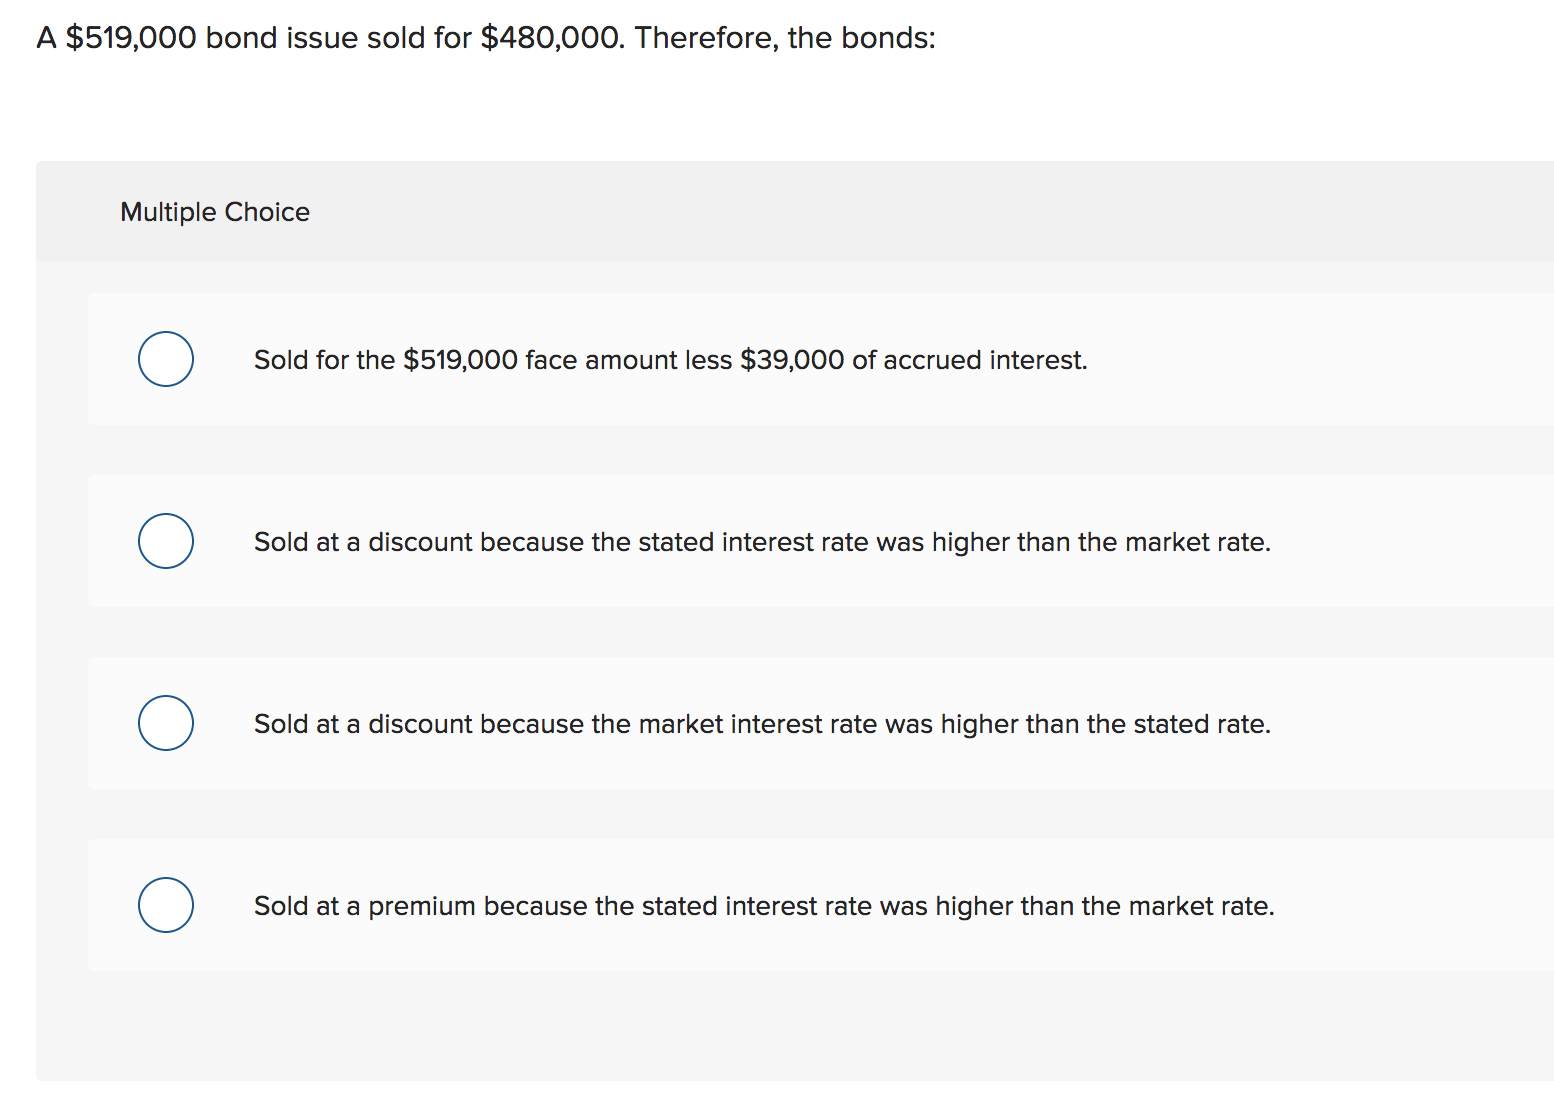 A $519,000 bond issue sold for $480,000. Therefore, the bonds:
Multiple Choice
Sold for the $519,000 face amount less $39,000 of accrued interest
Sold at a discount because the stated interest rate was higher than the market rate.
Sold at a discount because the market interest rate was higher than the stated rate.
Sold at a premium because the stated interest rate was higher than the market rate.
